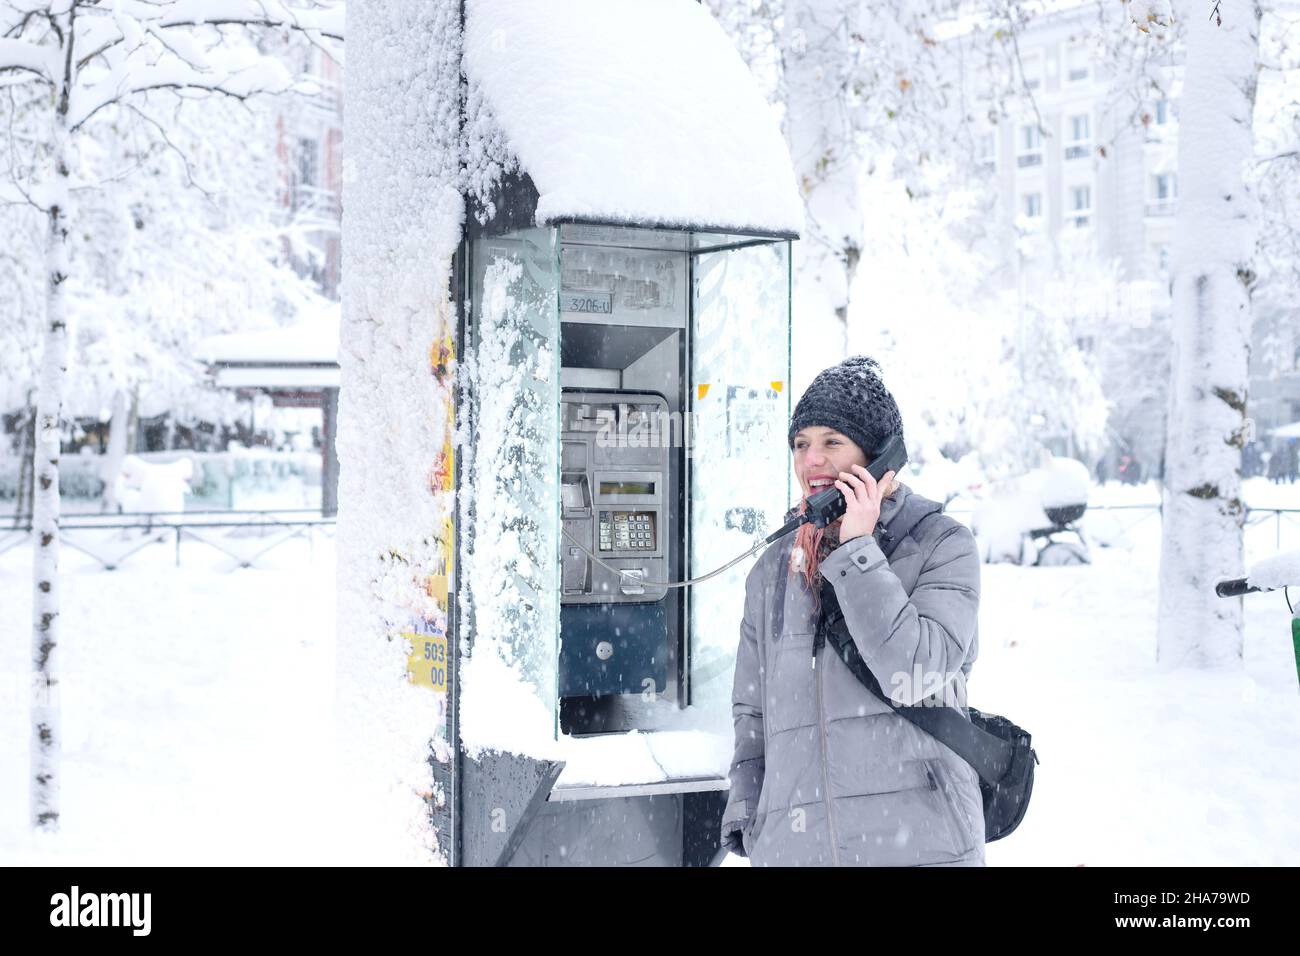 woman talking in a public phone booth on a day completely covered with snow Stock Photo